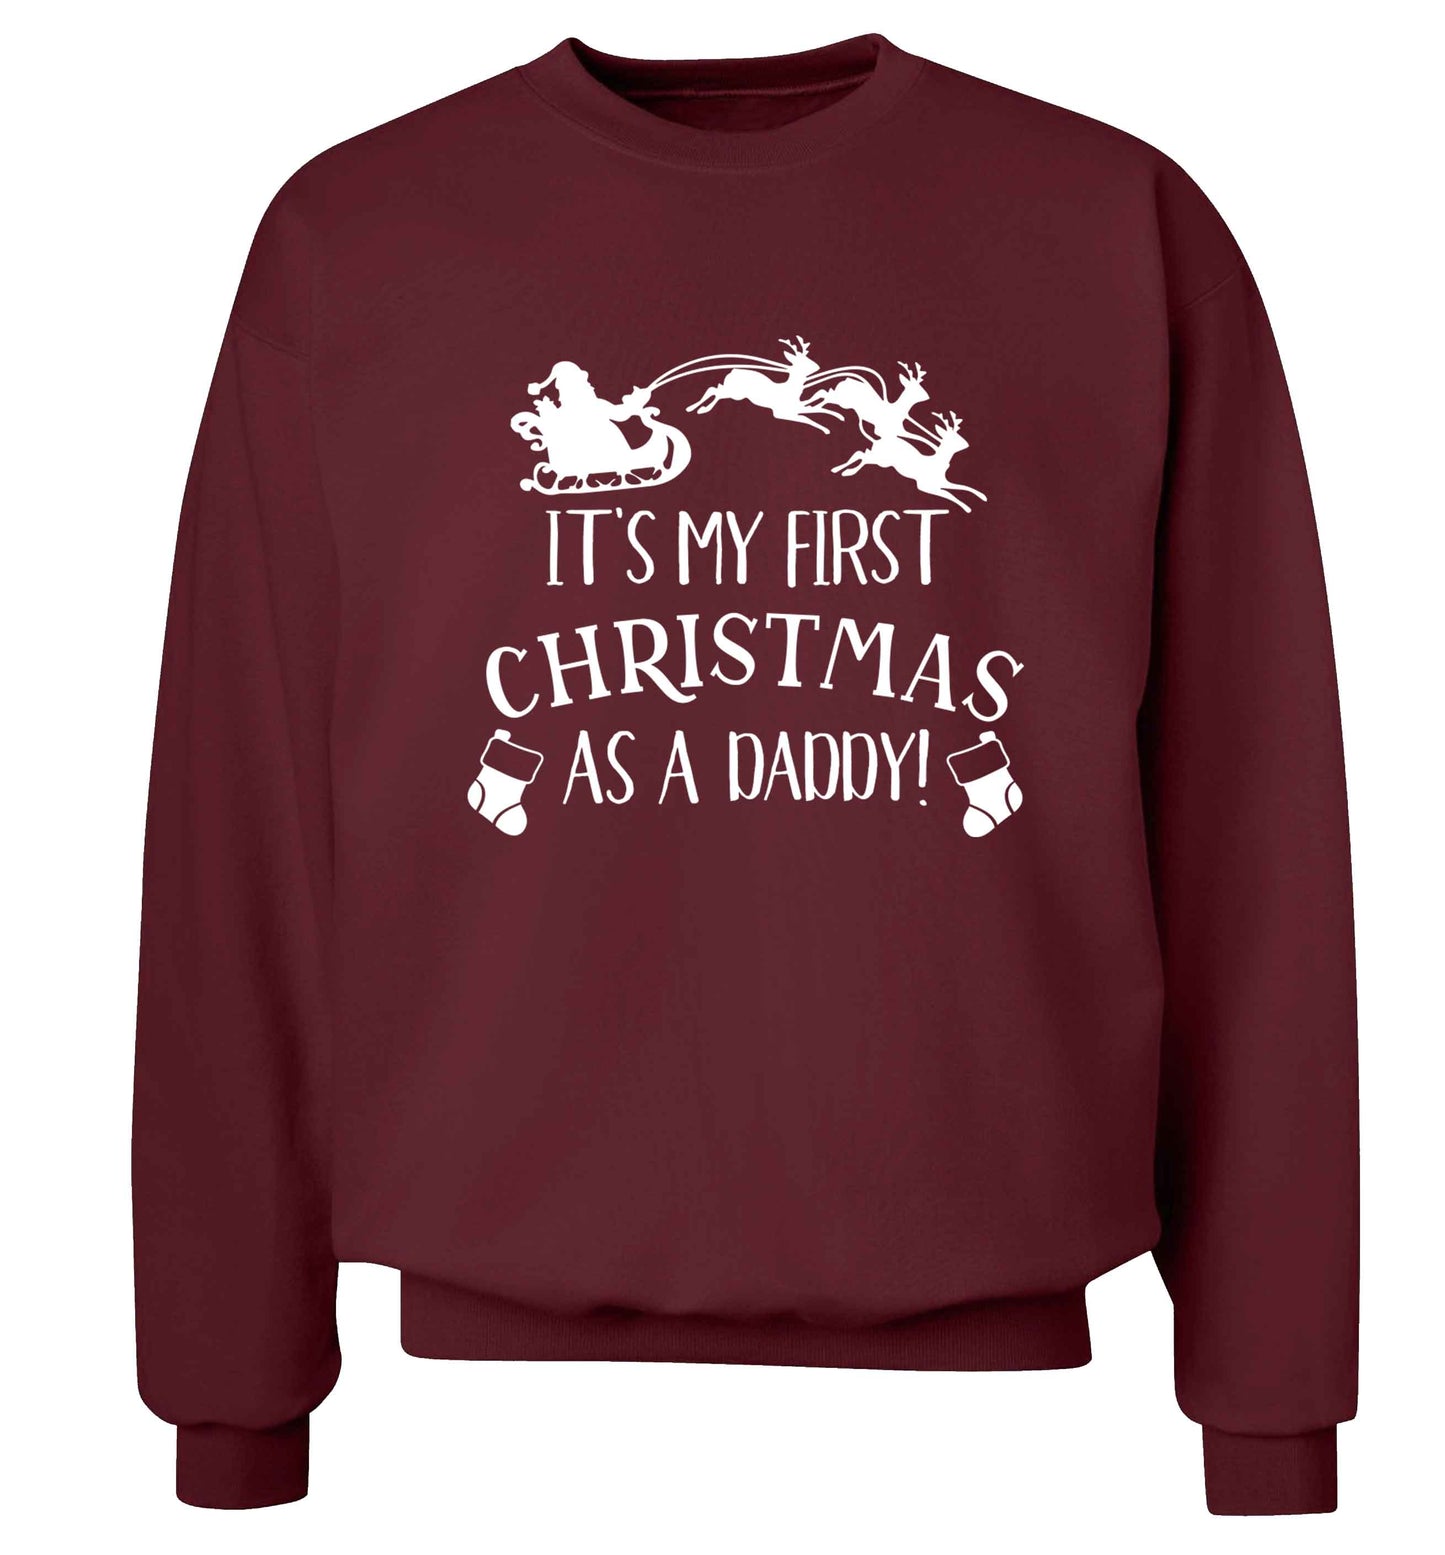 It's my first Christmas as a daddy Adult's unisex maroon Sweater 2XL